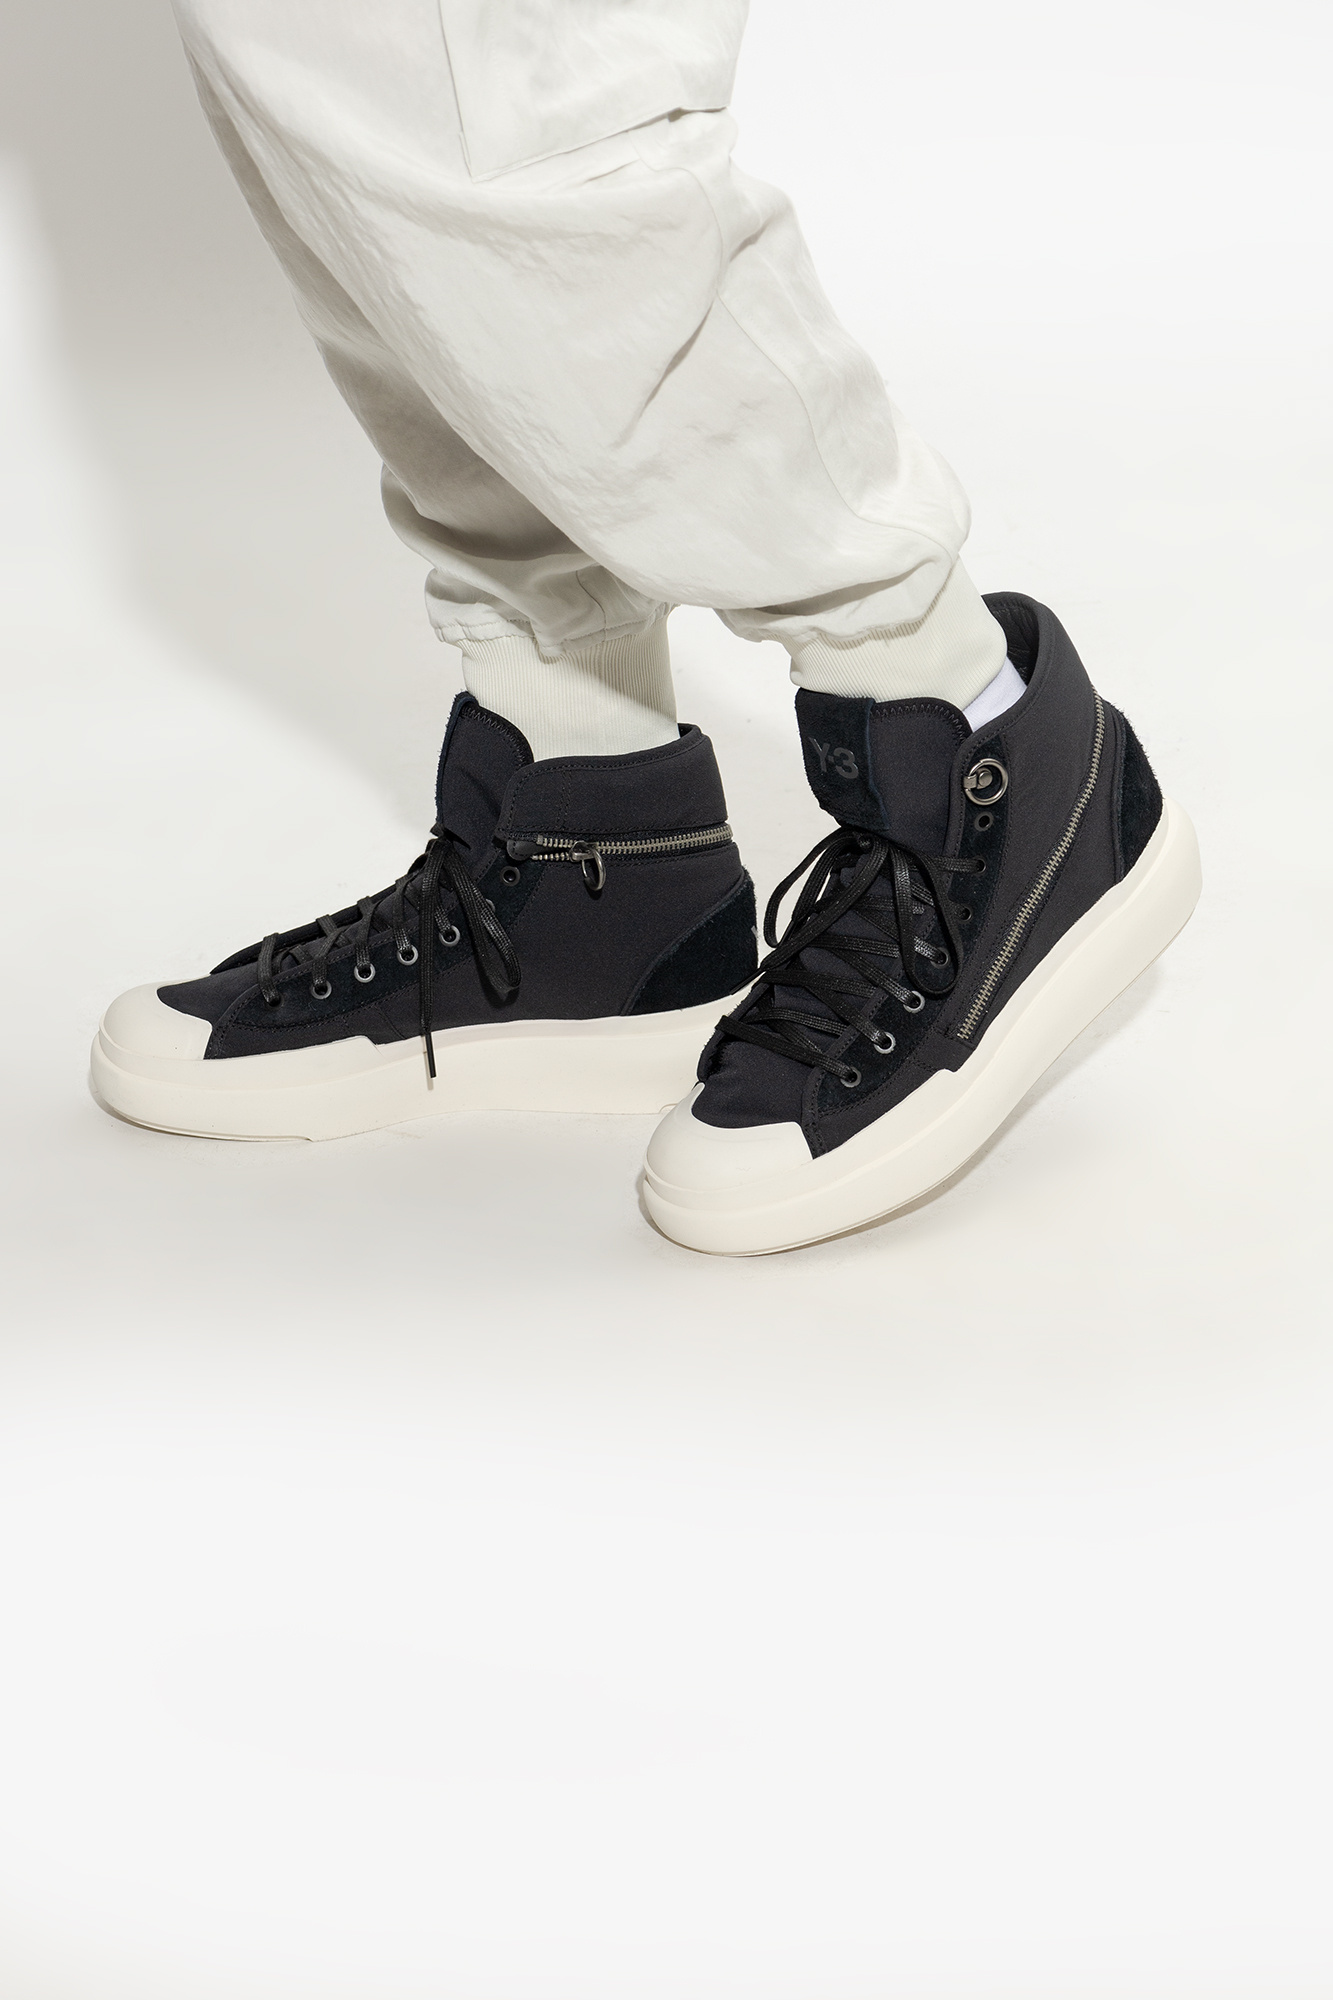 Lacoste Court slam Pink sneakers ‘Ajatu Court High’ high-top sneakers